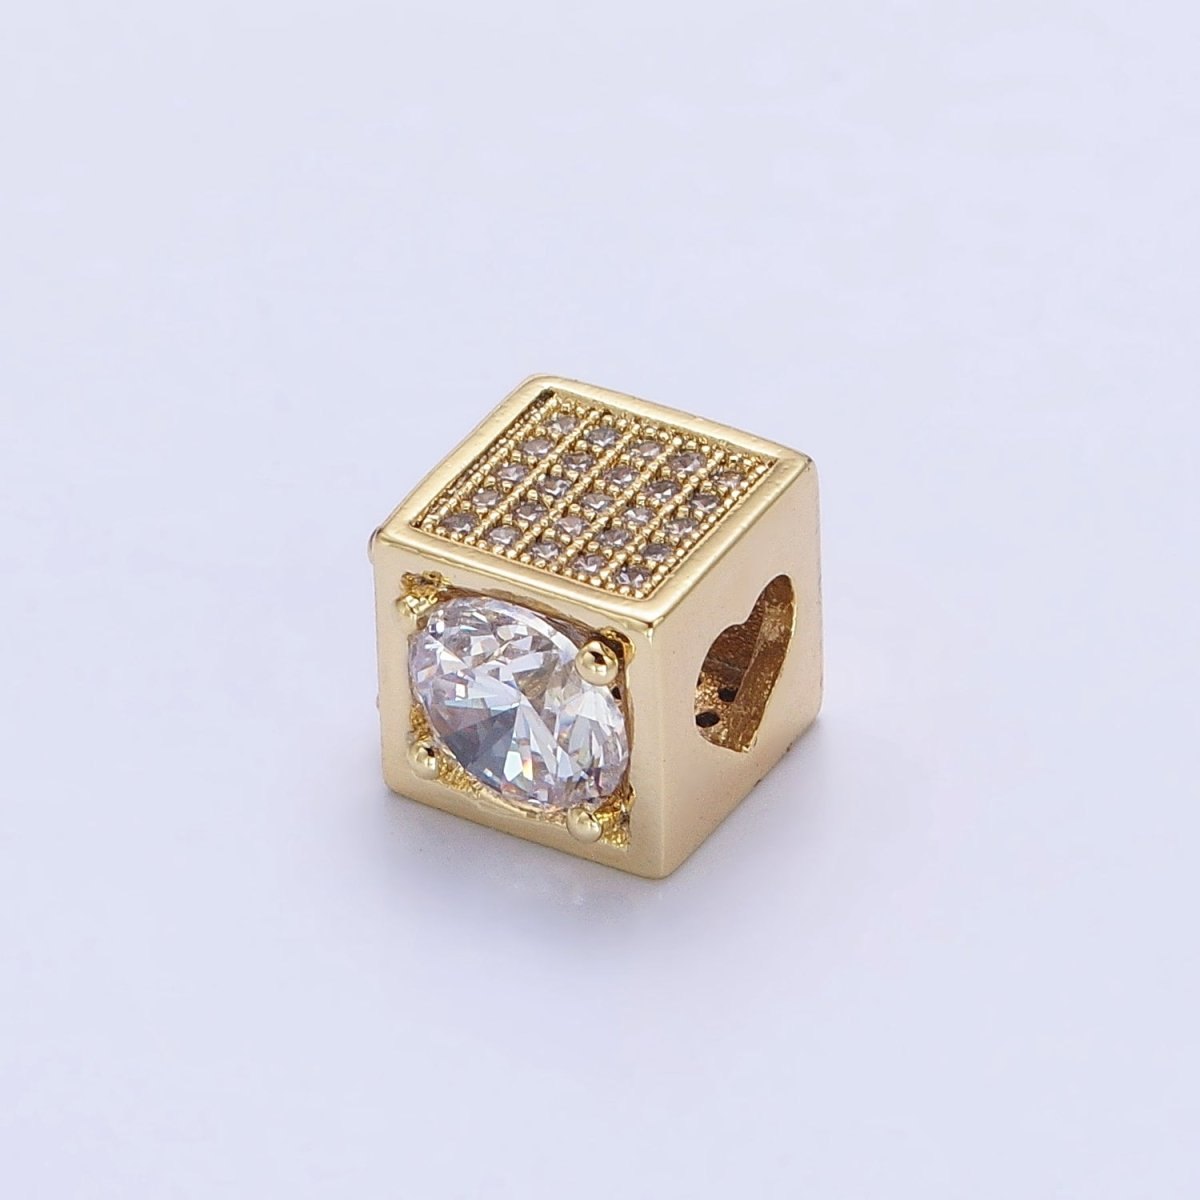 14k Gold Filled CZ Micro Pave Beads, Cubic Zirconia Beads Heart Connecter Beads 10mm Square Cube Beads for Jewelry Making B-814 - DLUXCA